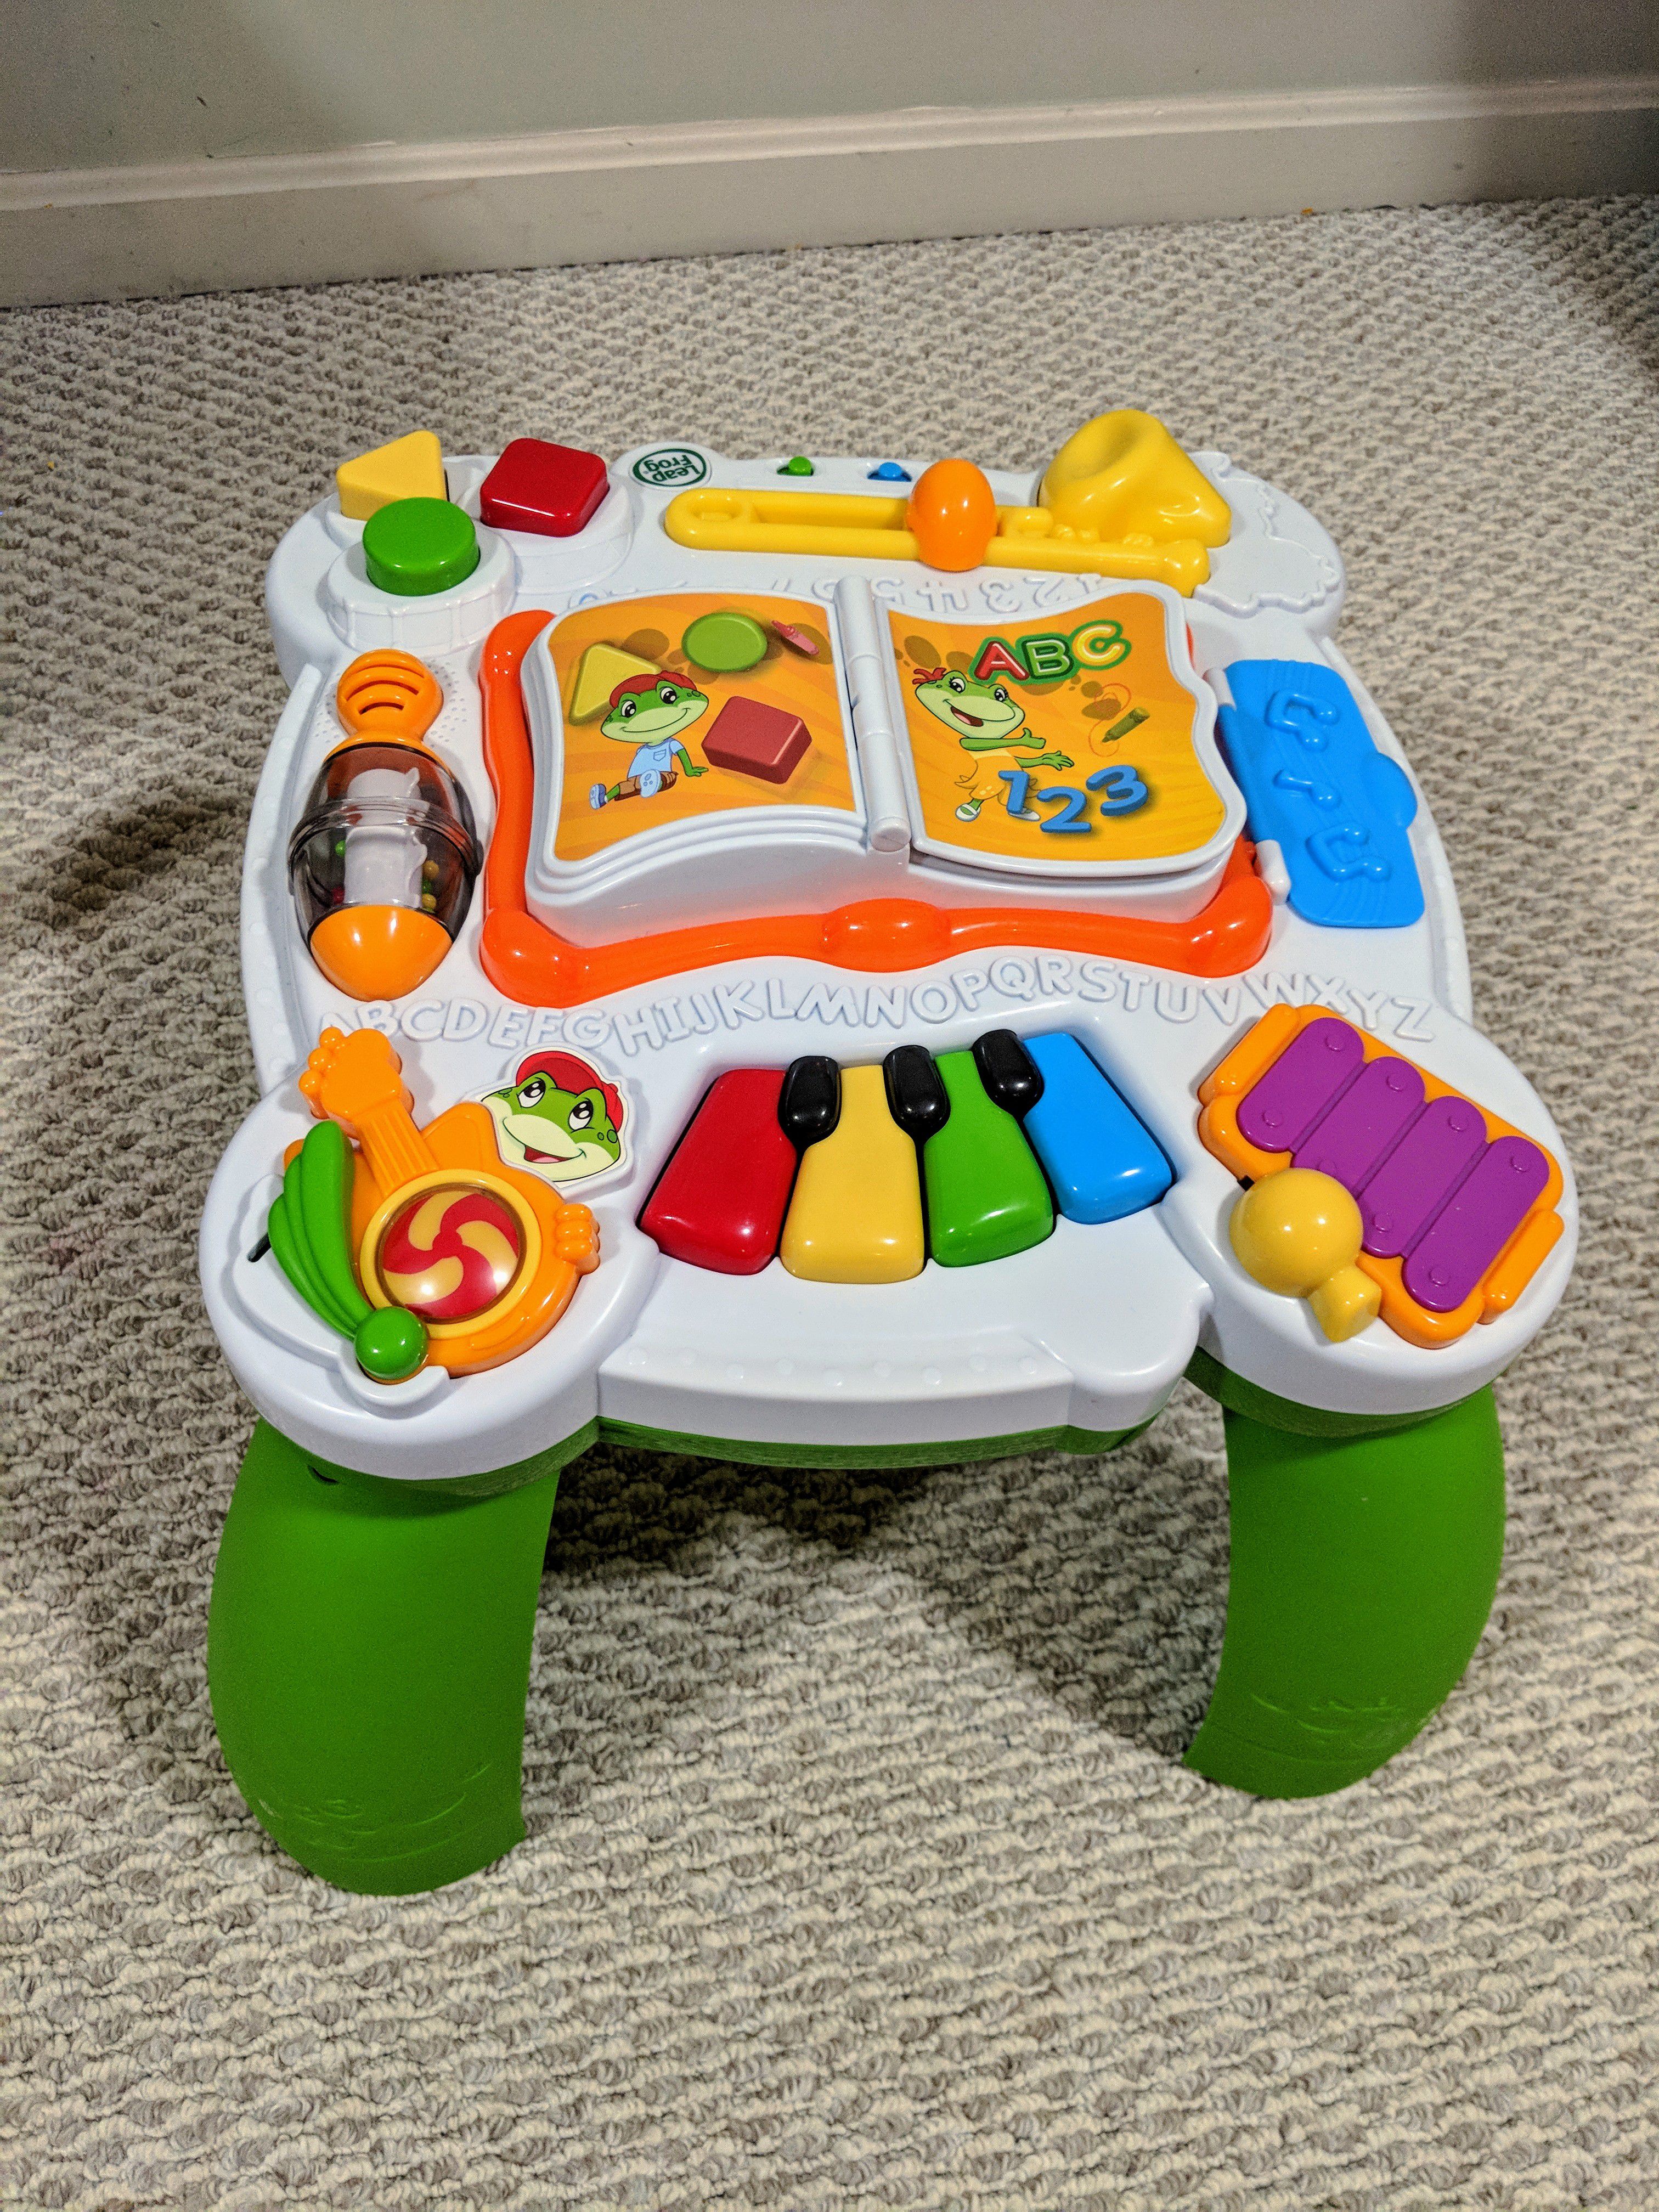 Leapfrog Learn and Groove Musical Table Activity Center